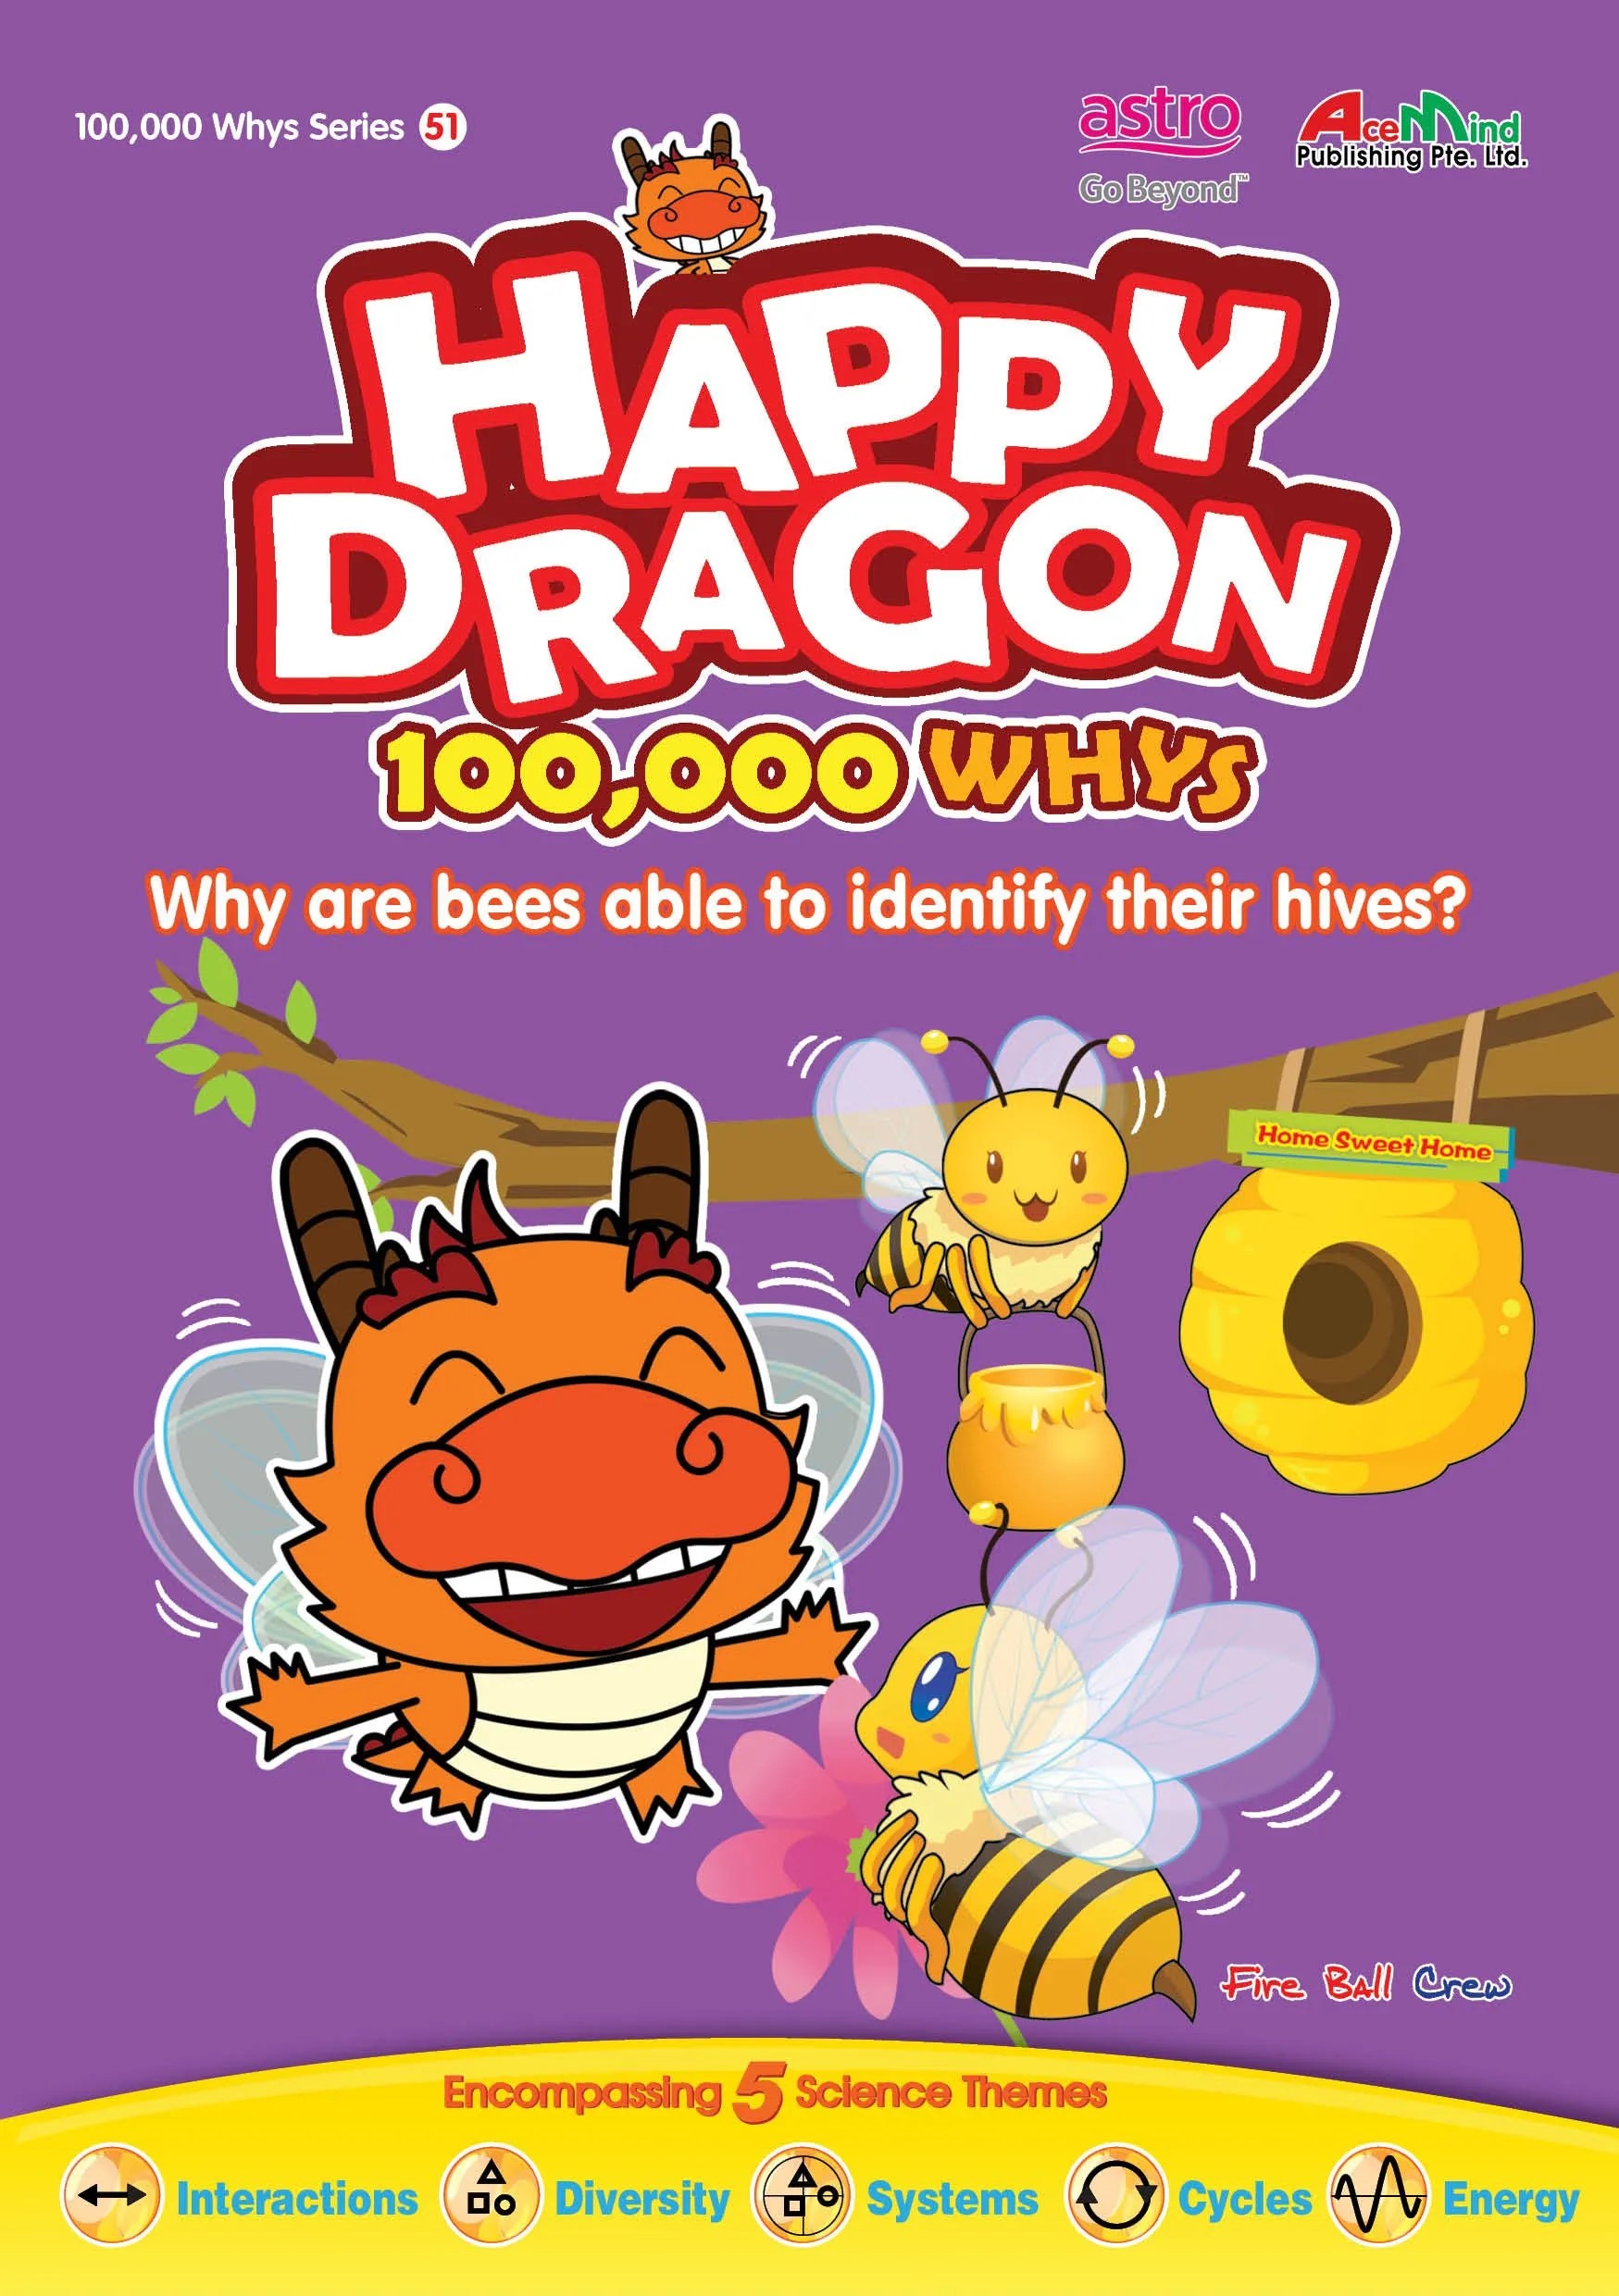 Happy Dragon#51 Why Are Bees Able To
Identify Their Hives?